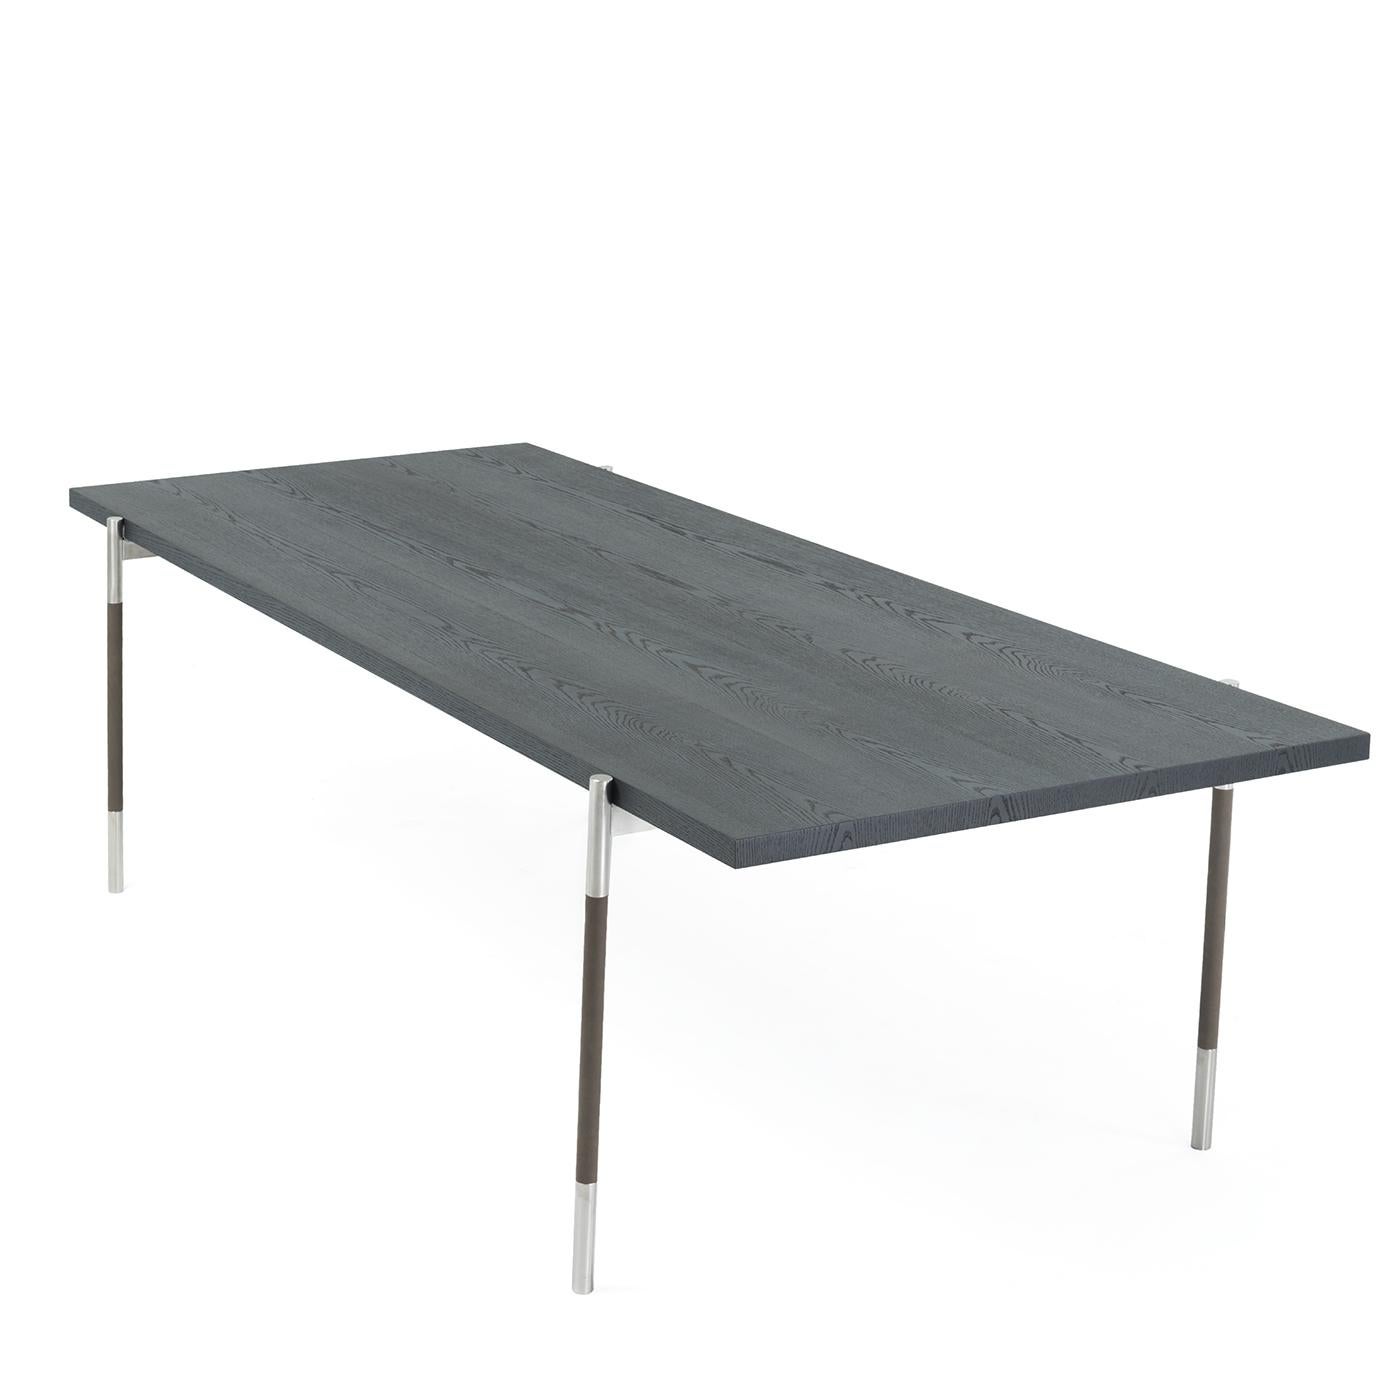 This barely there oak table seems to defy gravity. It’s thin, brushed charcoal gray top floats over four narrow satin stainless steel legs with genuine leather detailing. It comfortably seats eight people, making it the perfect addition to a dining